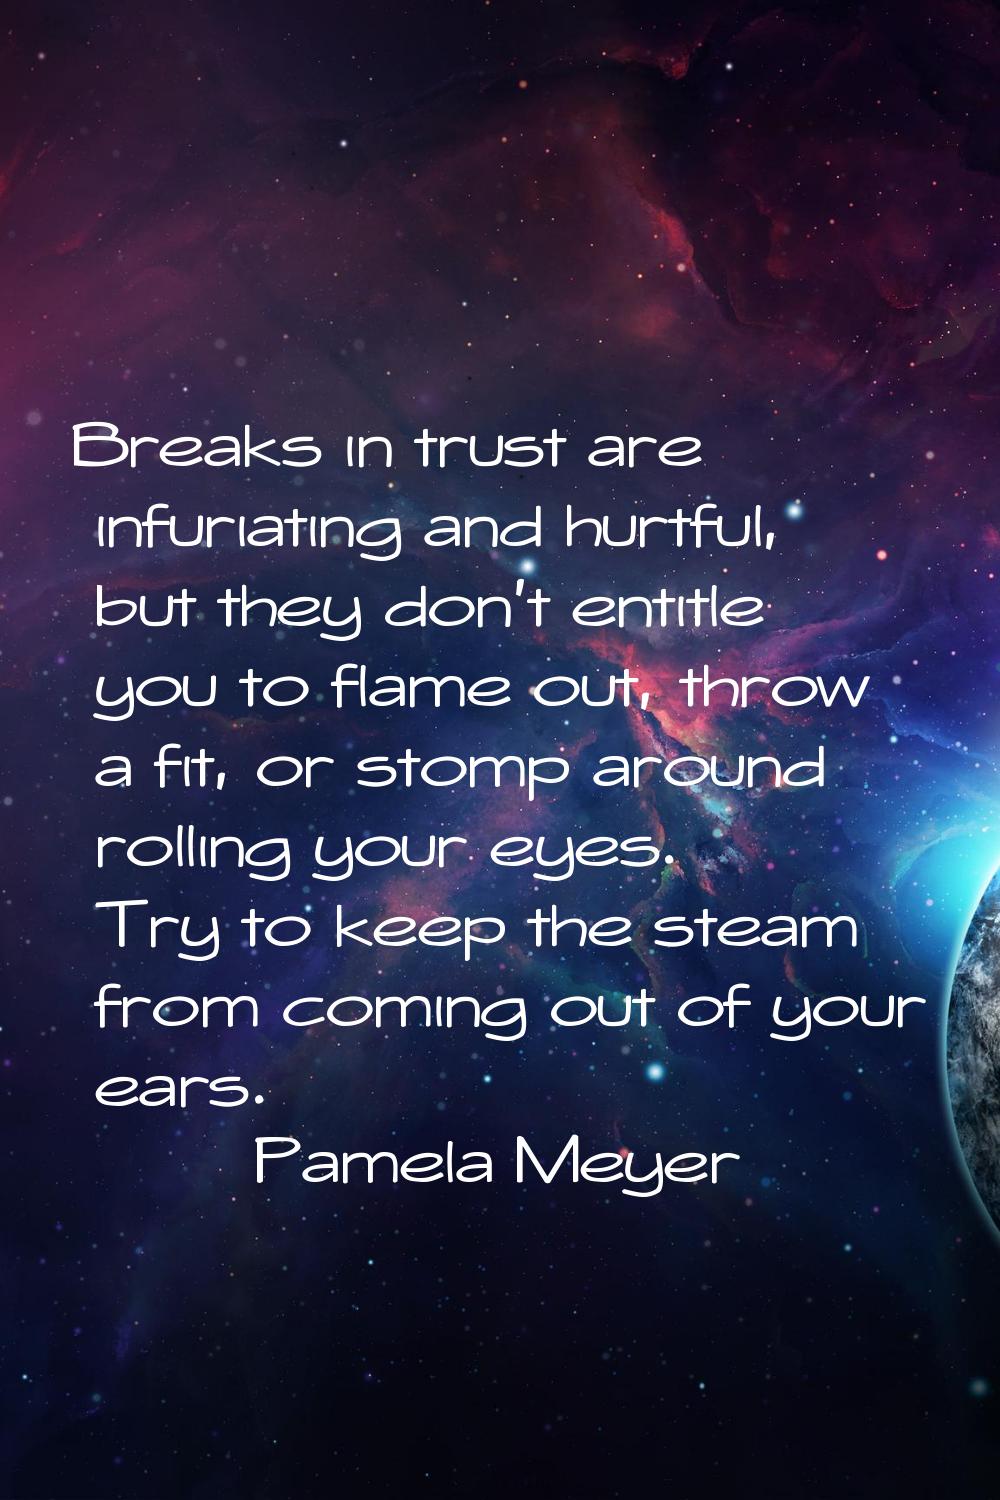 Breaks in trust are infuriating and hurtful, but they don't entitle you to flame out, throw a fit, 